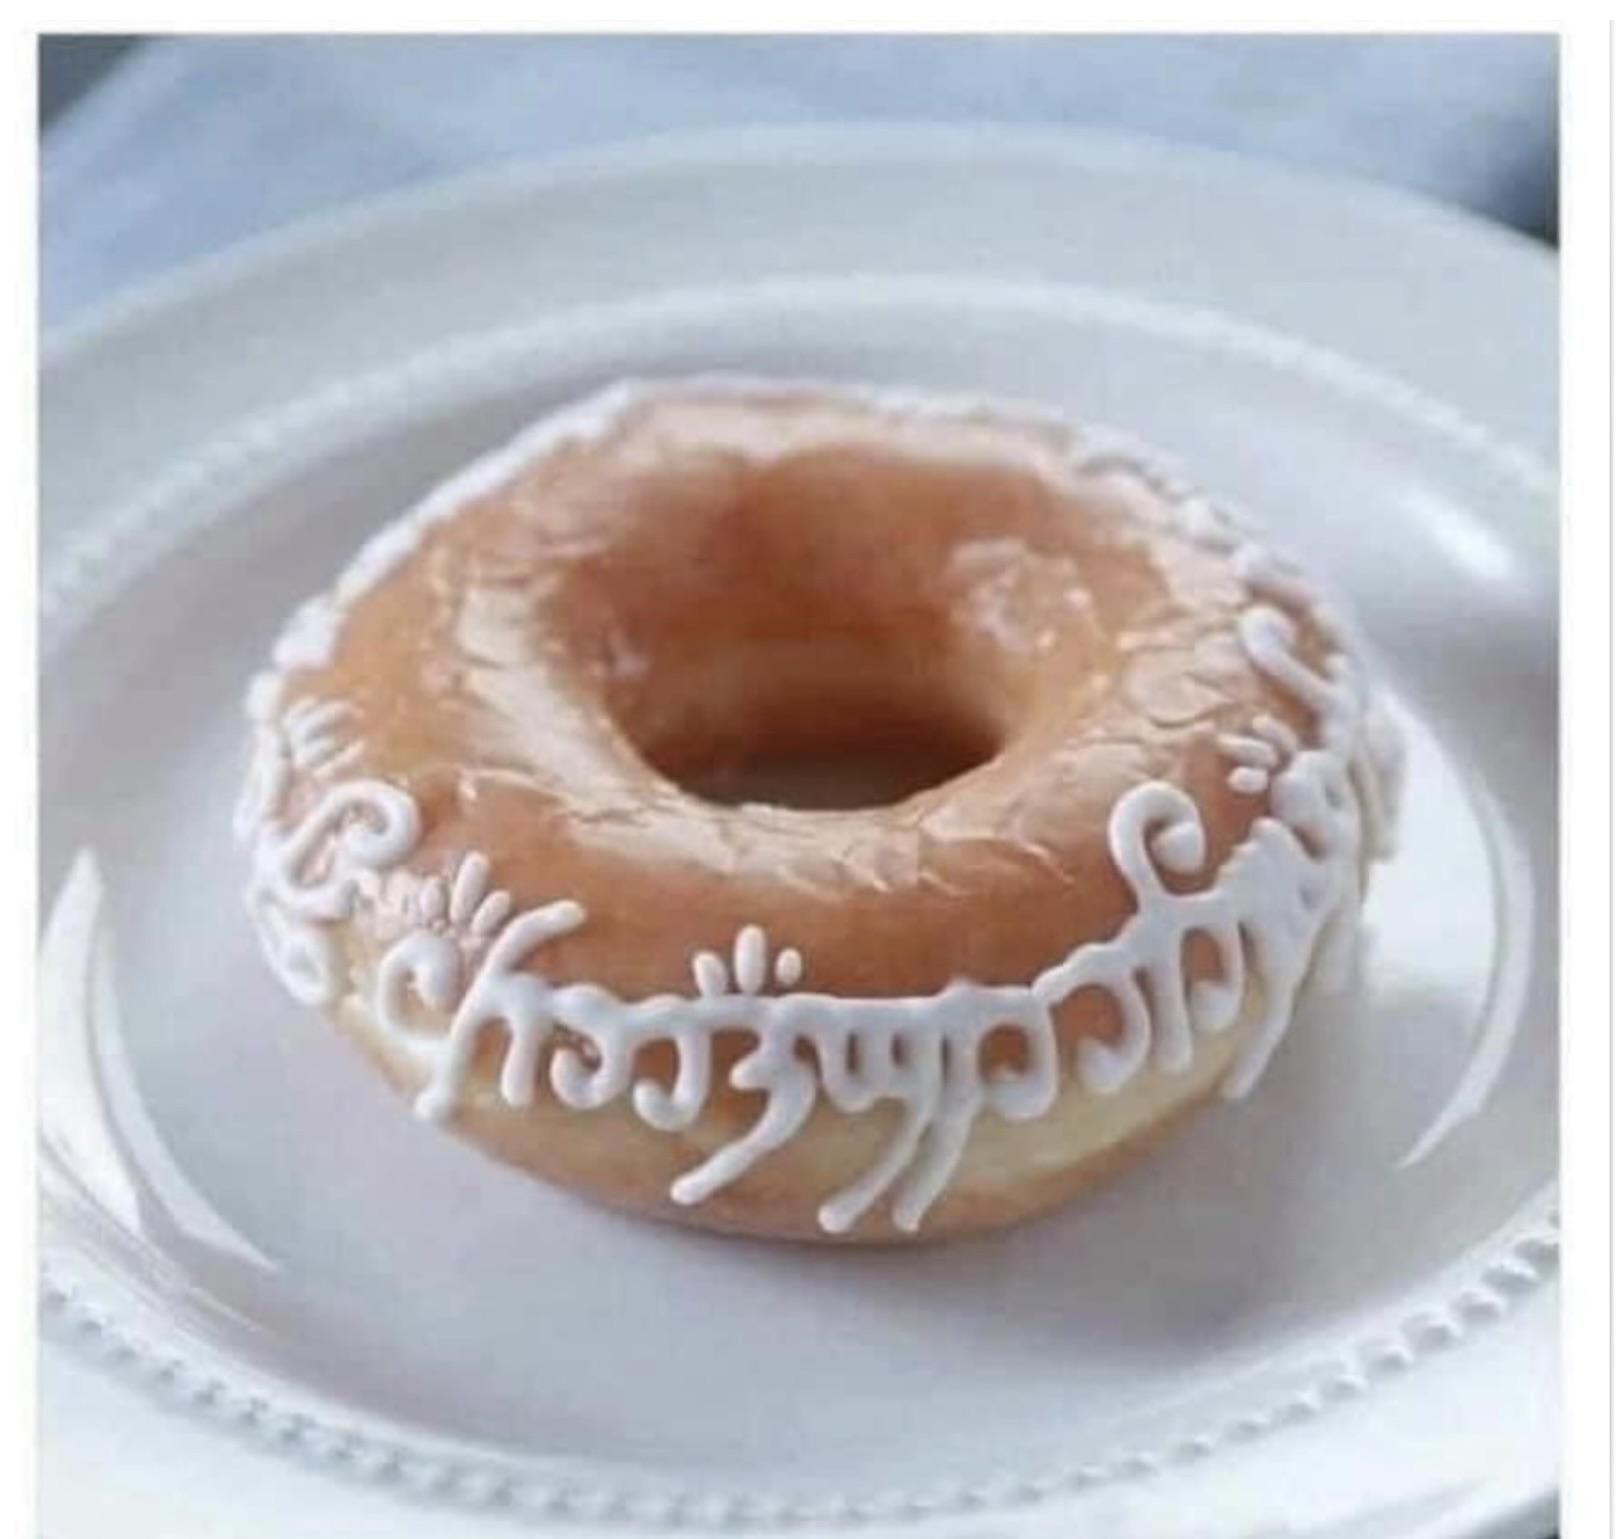 One donut to rule them all!